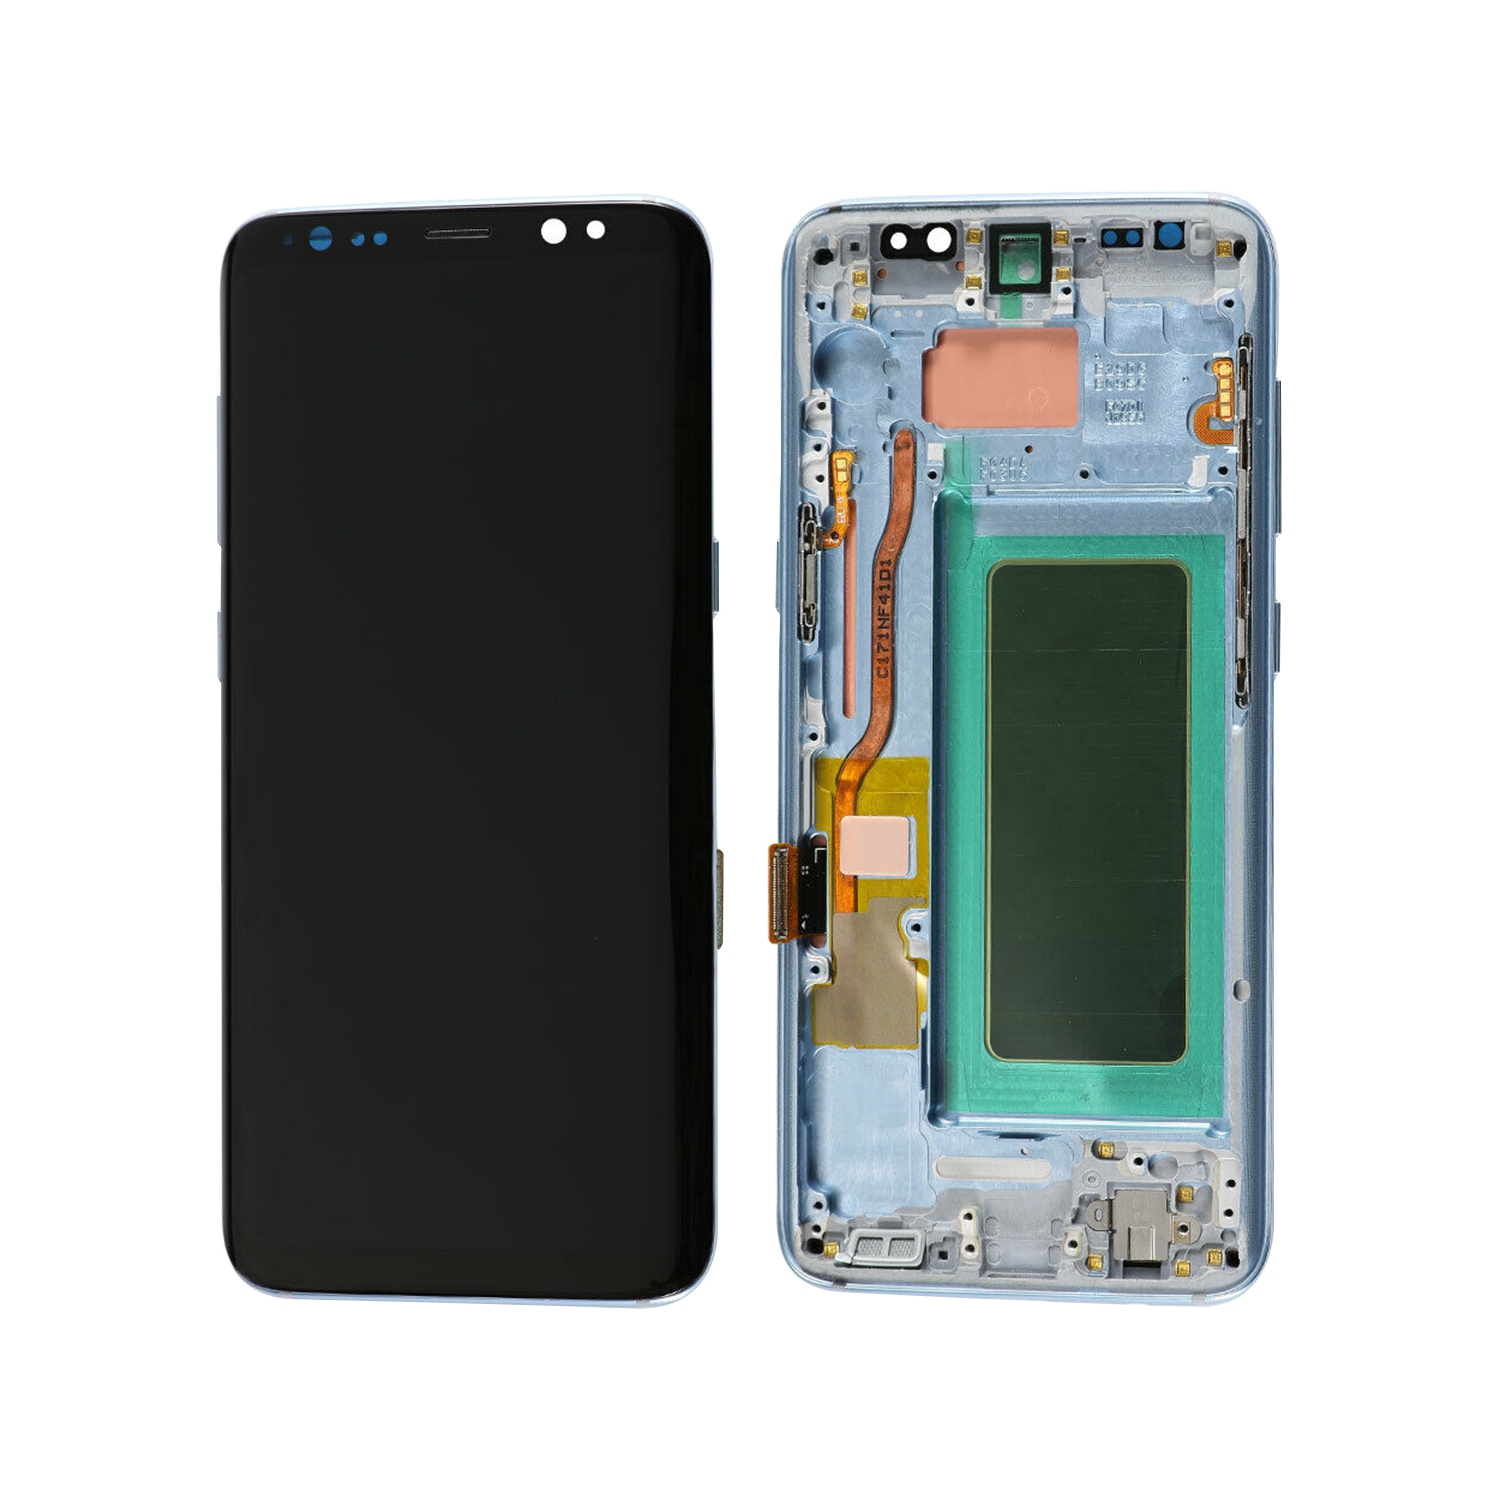 Replacement LCD Display Touch Screen Digitizer Assembly With Frame For Samsung Galaxy S8 - Coral Blue